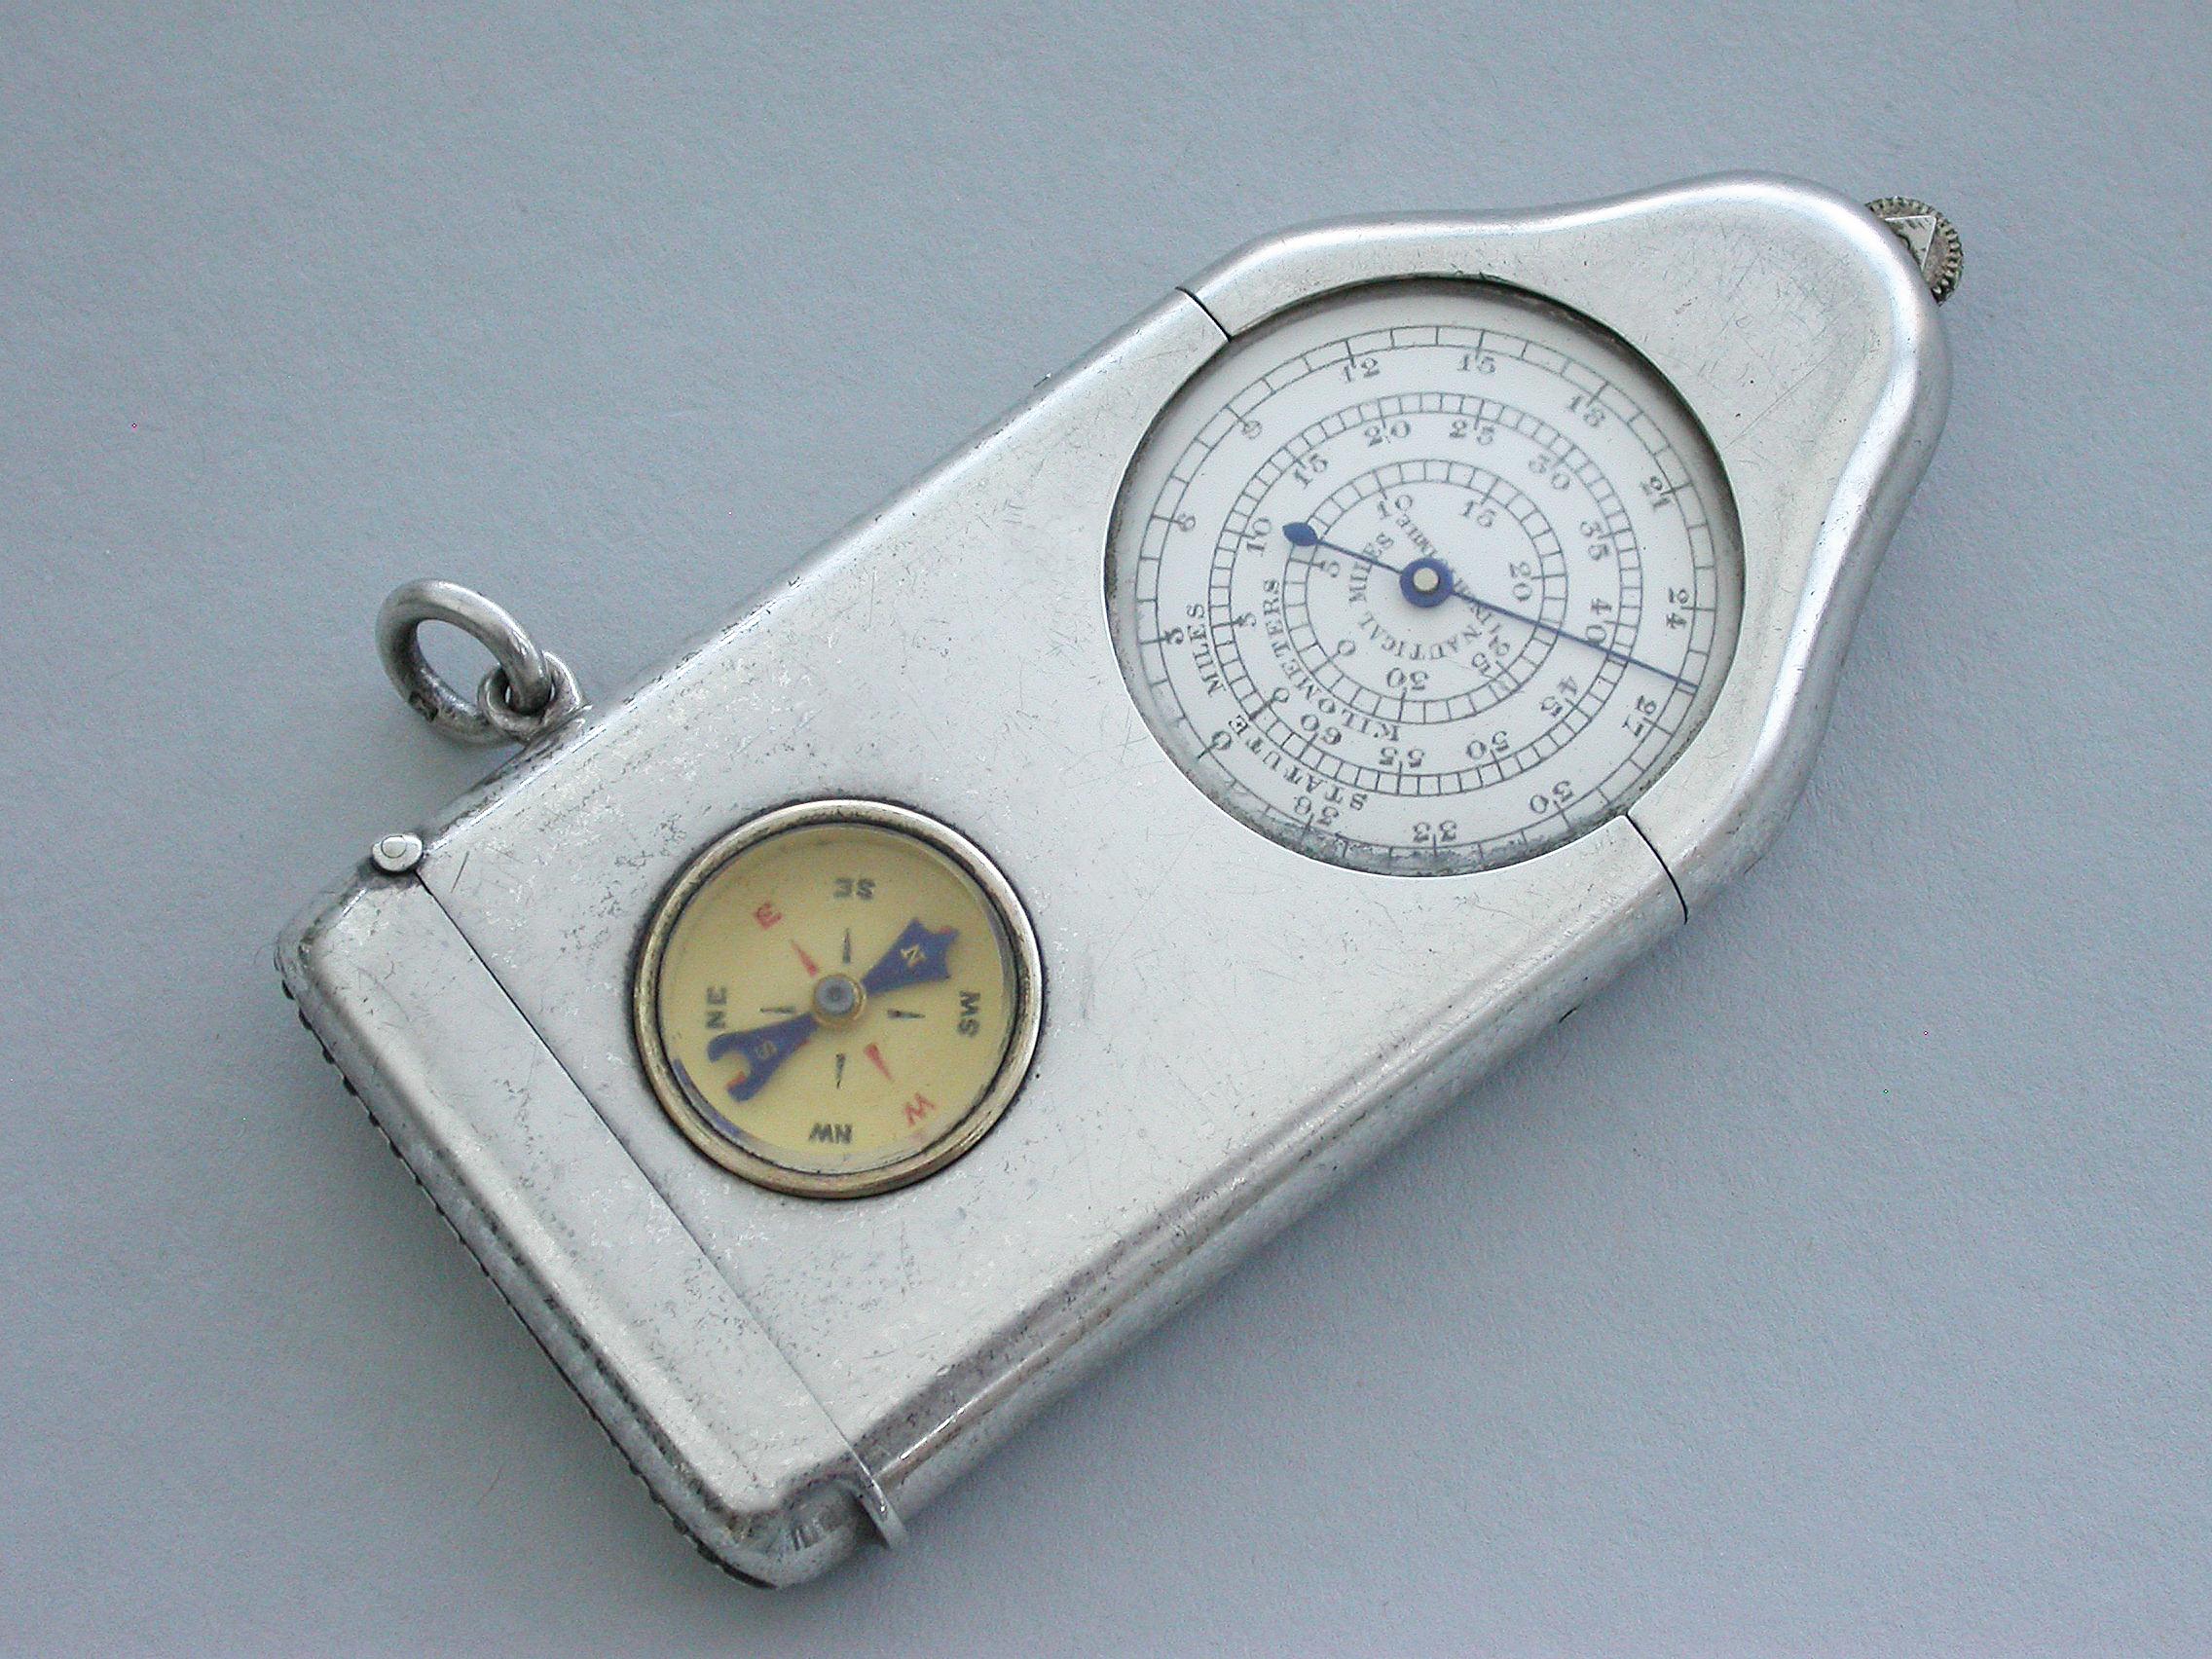 A fine and unusual George V silver Opisometer map measuring tool combined with a Vesta case and a compass, the two glazed enamel dials calibrated for statute miles, kilometers and nautical miles on one side, and half inches to miles and centimeters